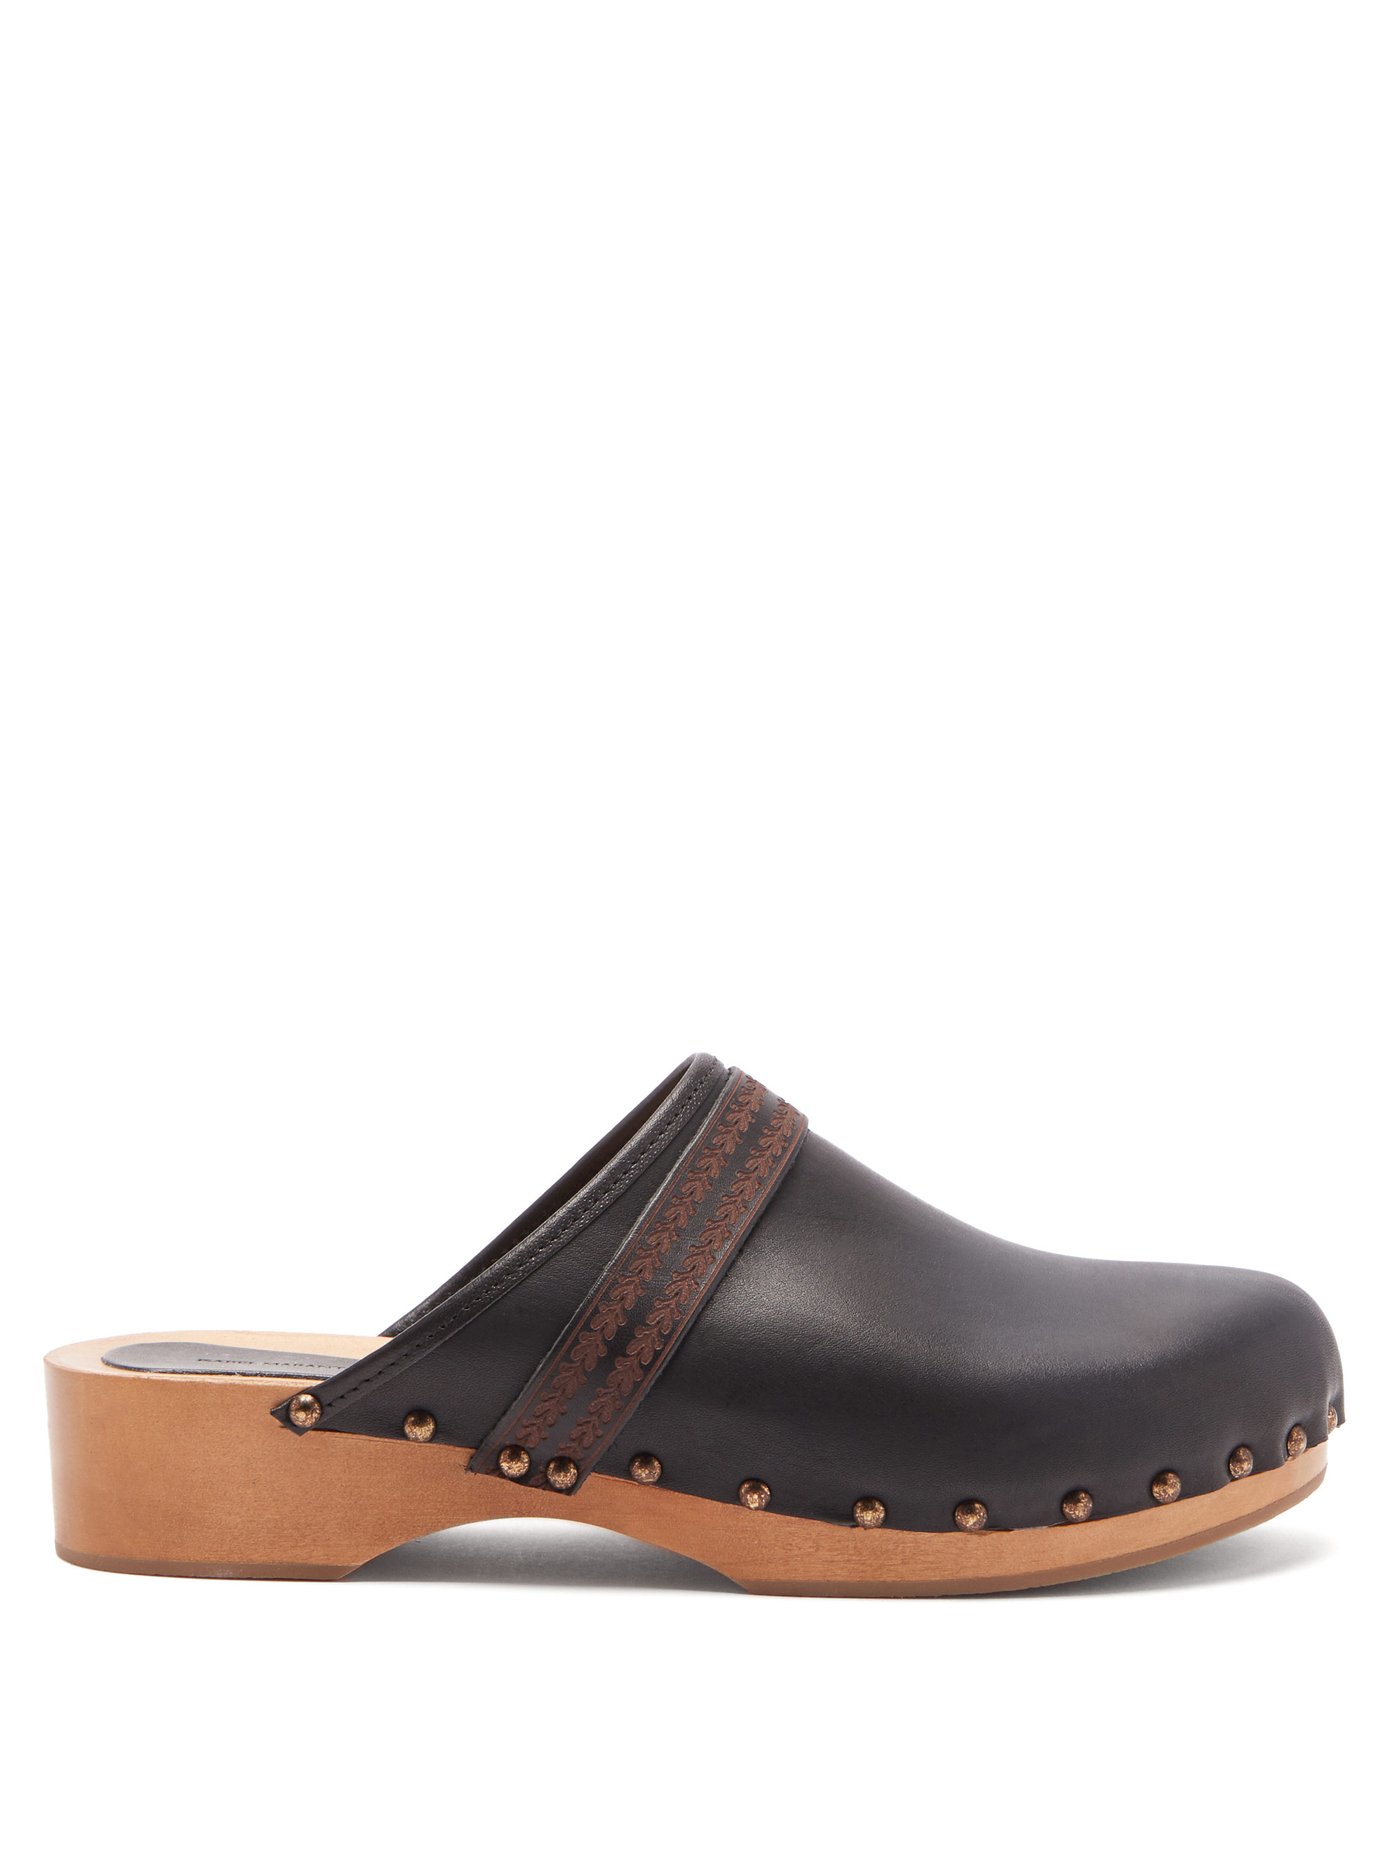 Thalie leather and wood clog mules 